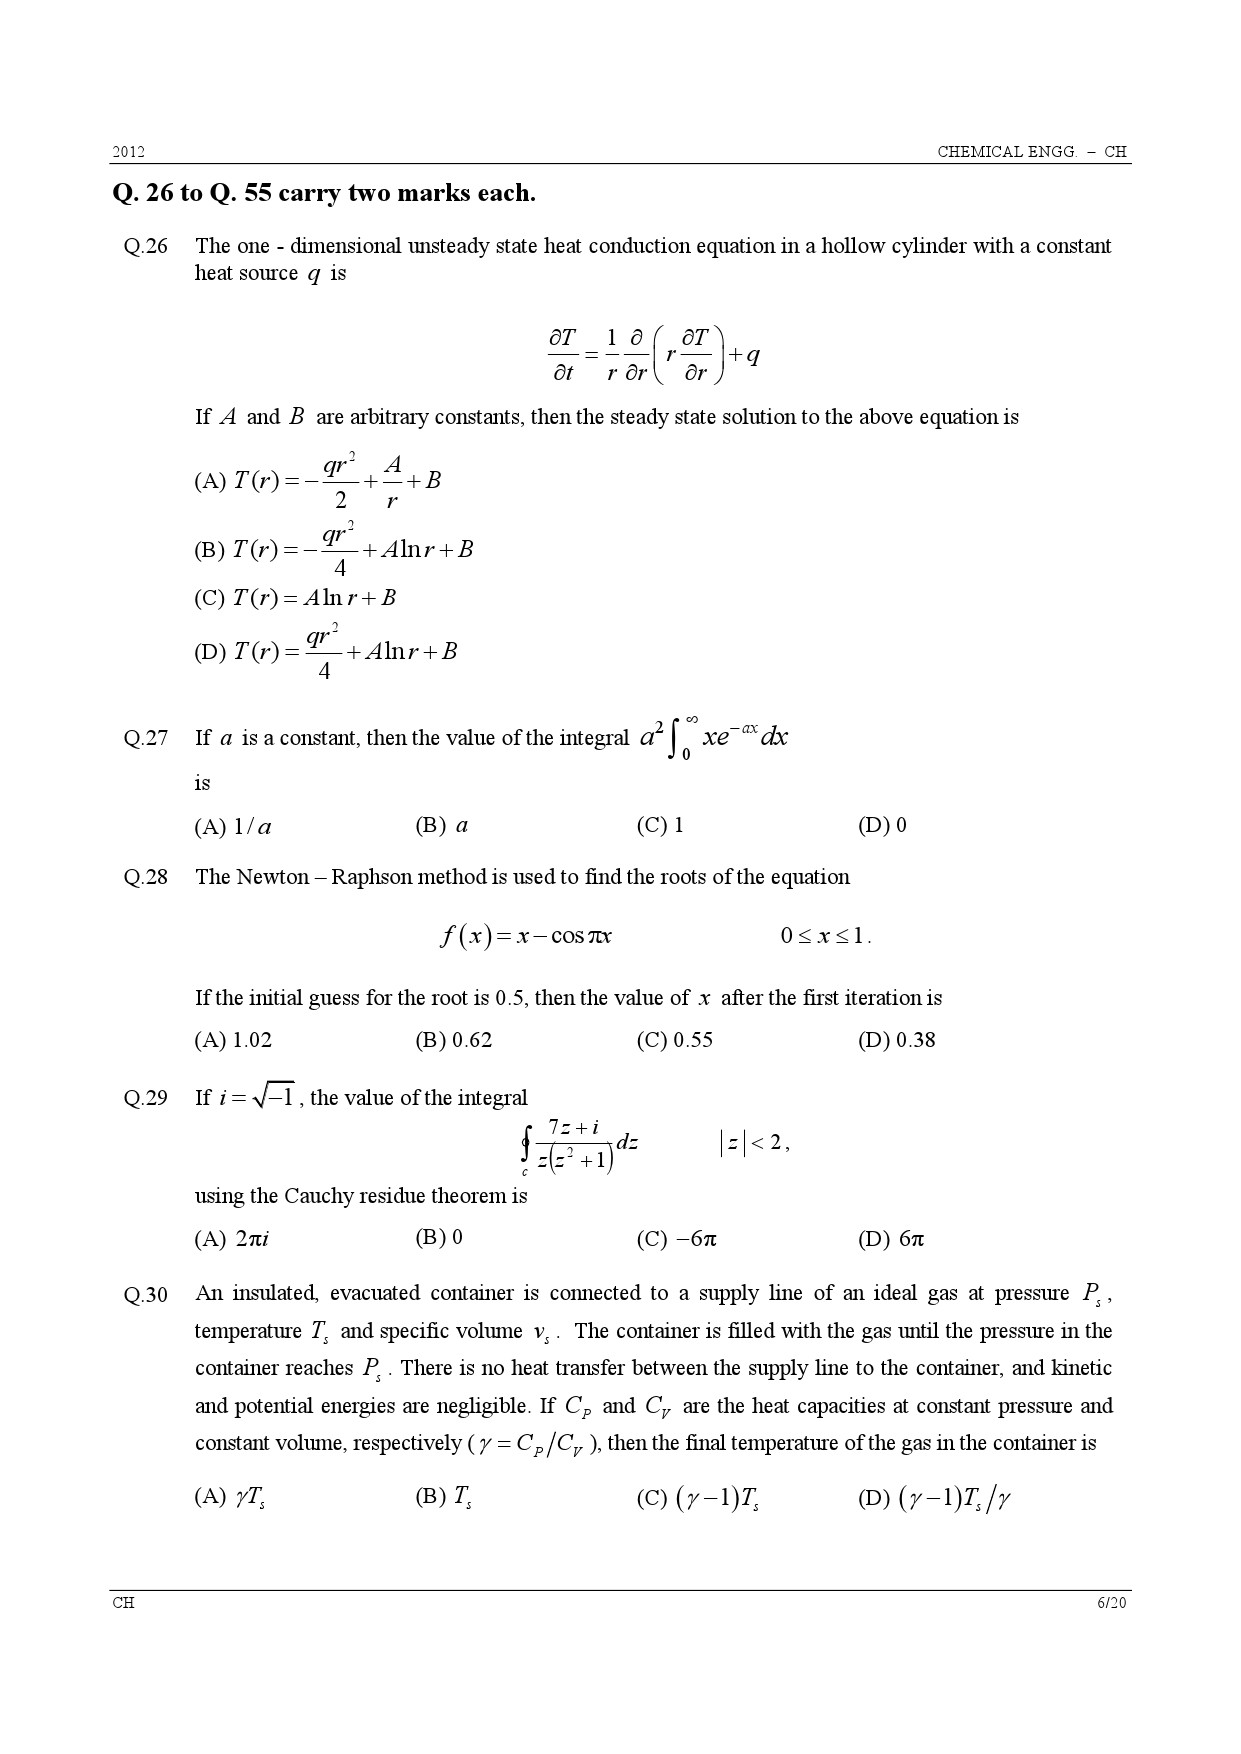 GATE Exam Question Paper 2012 Chemical Engineering 6